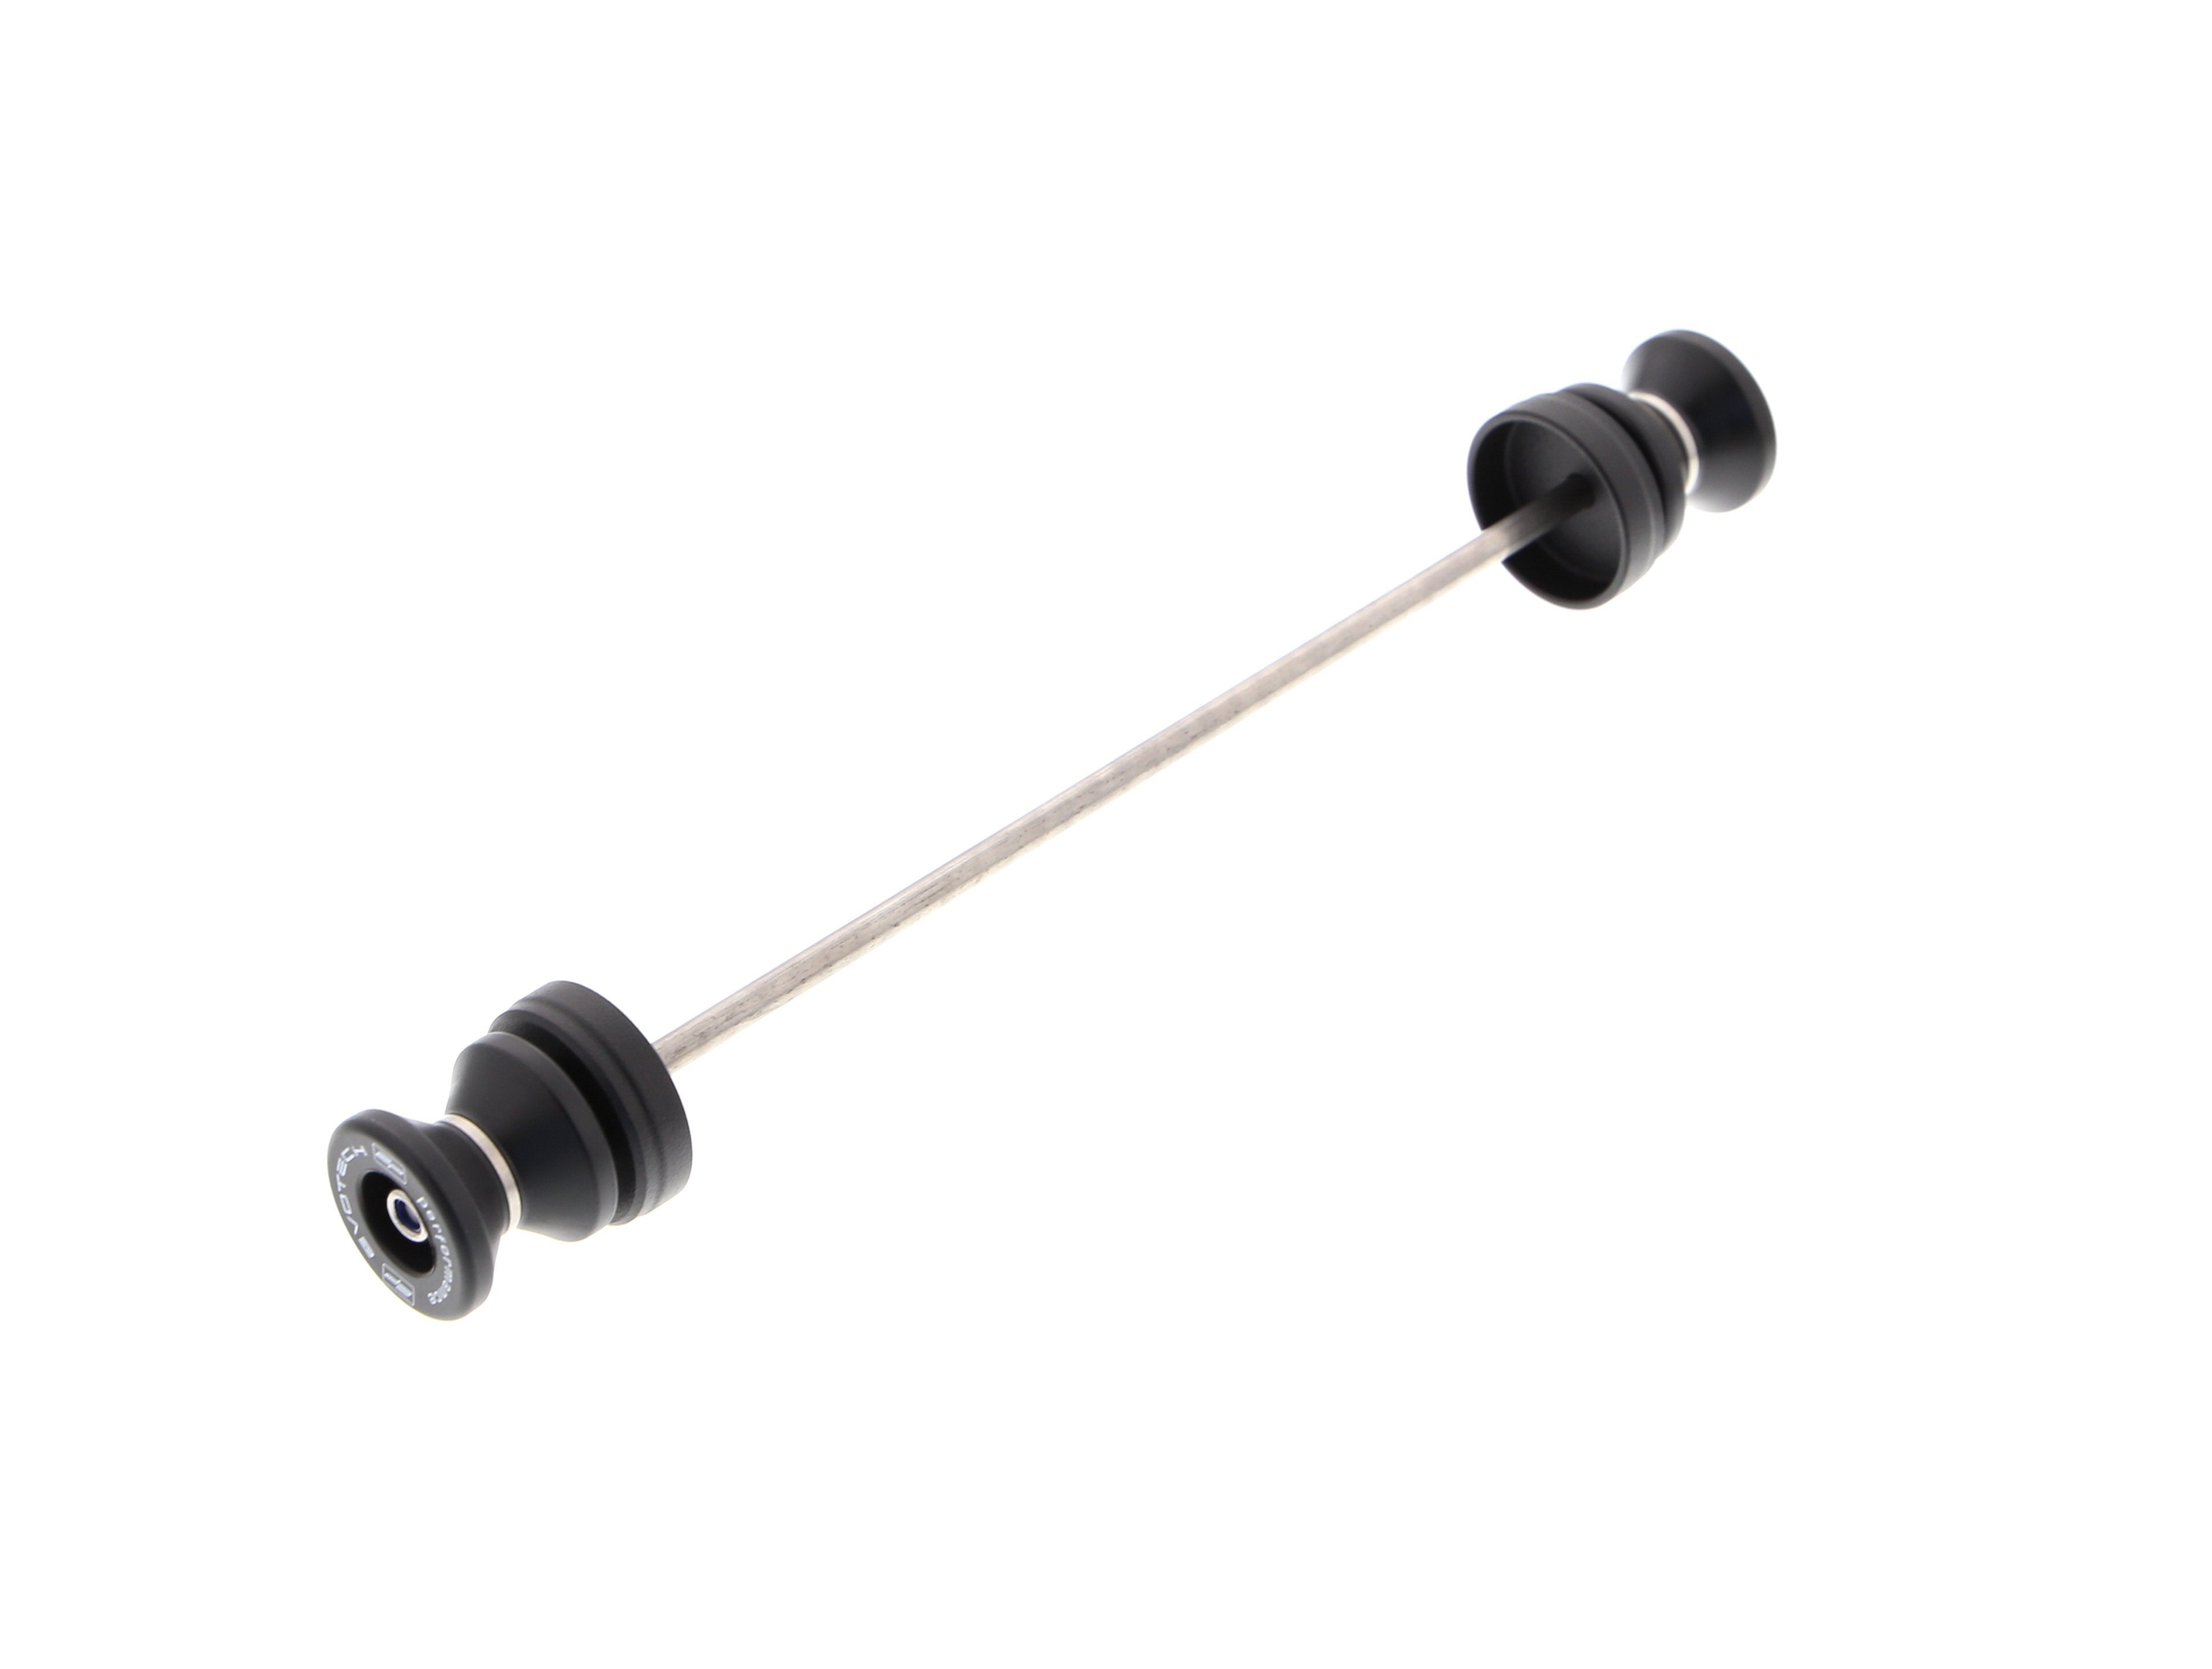 EP Paddock Stand Bobbins for the Ducati Scrambler Street Classic comprises a spindle rod with EPs signature nylon paddock stand bobbins either end with precision shaped aluminium spacer.